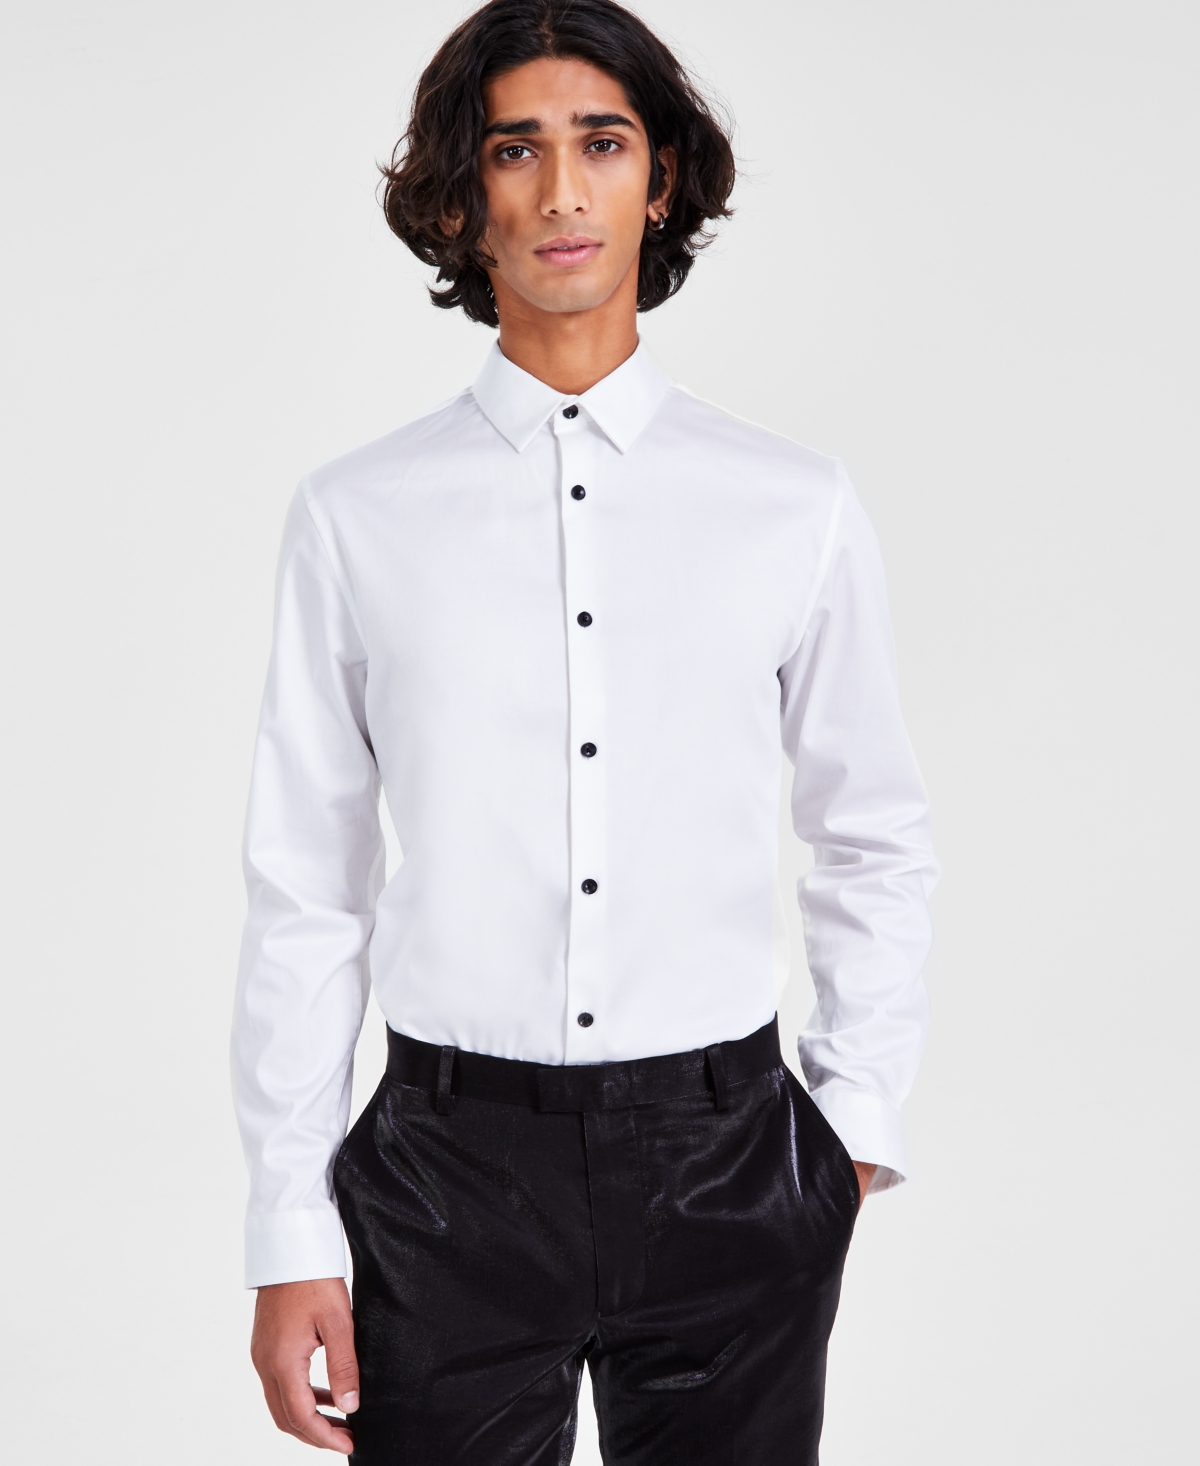 Men's Slim Fit Dress Shirt, Created for Macy's - White Pure